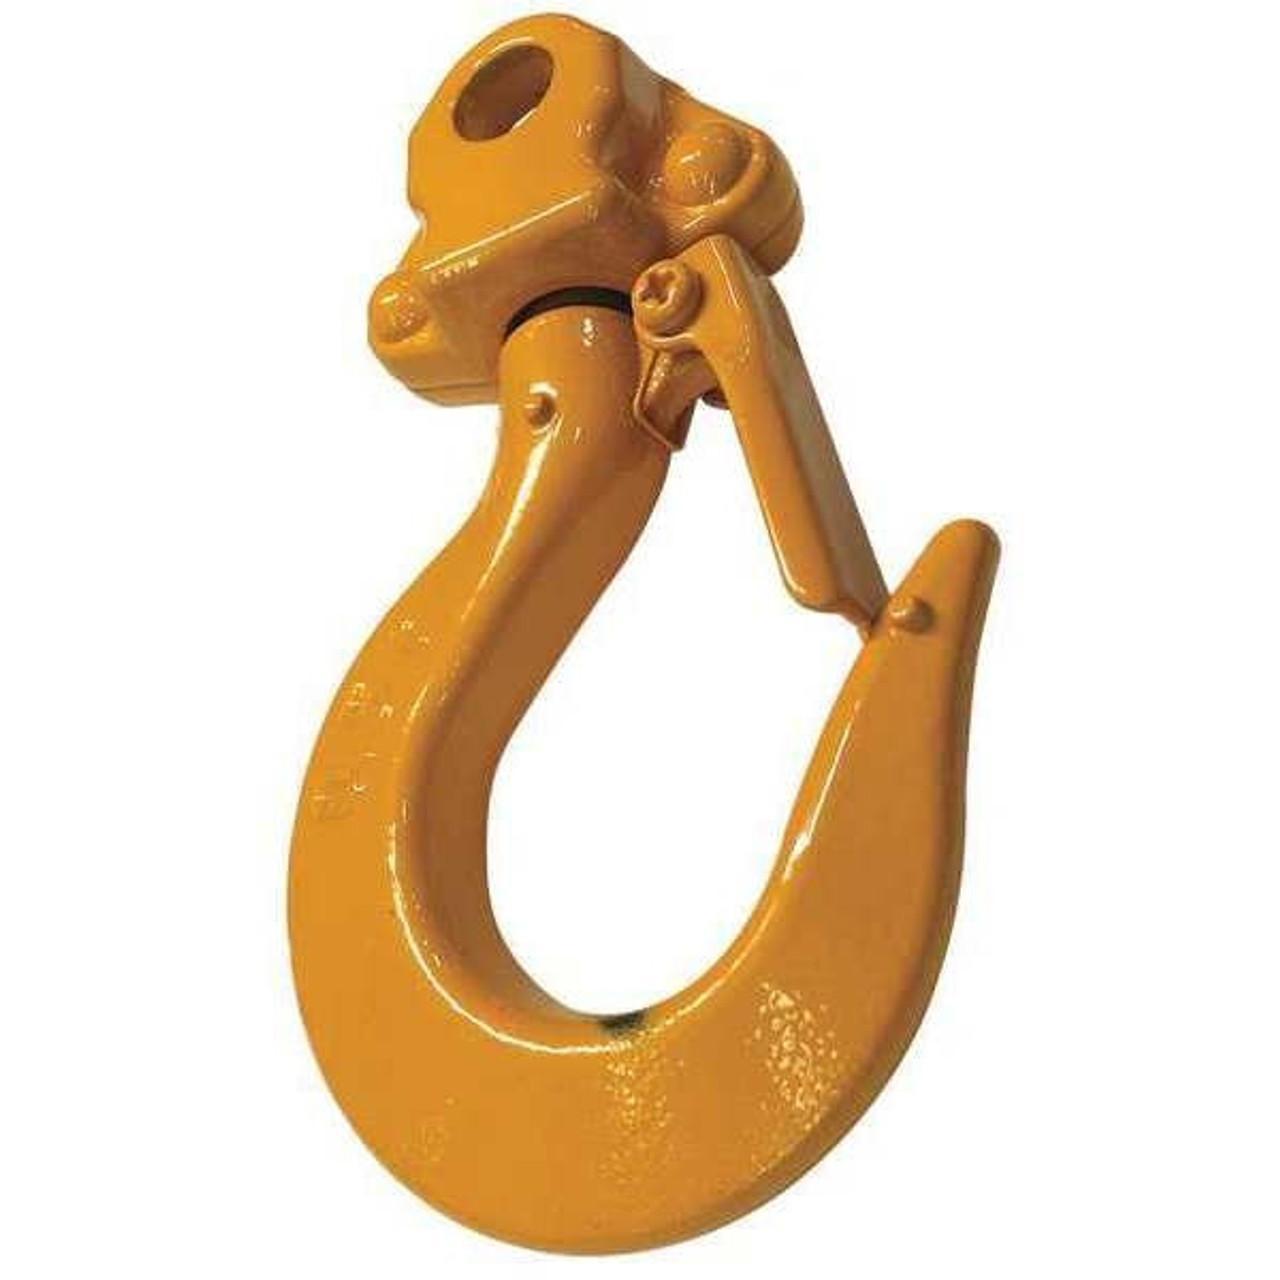 Top Hook Assembly, Product Type Top Hook Assembly, Compatible Hoist Type Manual Chain Hoists, Compatible Load Capacity 1,000 lb, Compatible Series CF, Material Carbon Steel, Overall Length Not Applicable, Overall Width 3 in, Overall Height Not Applicable, Includes Safety Latch